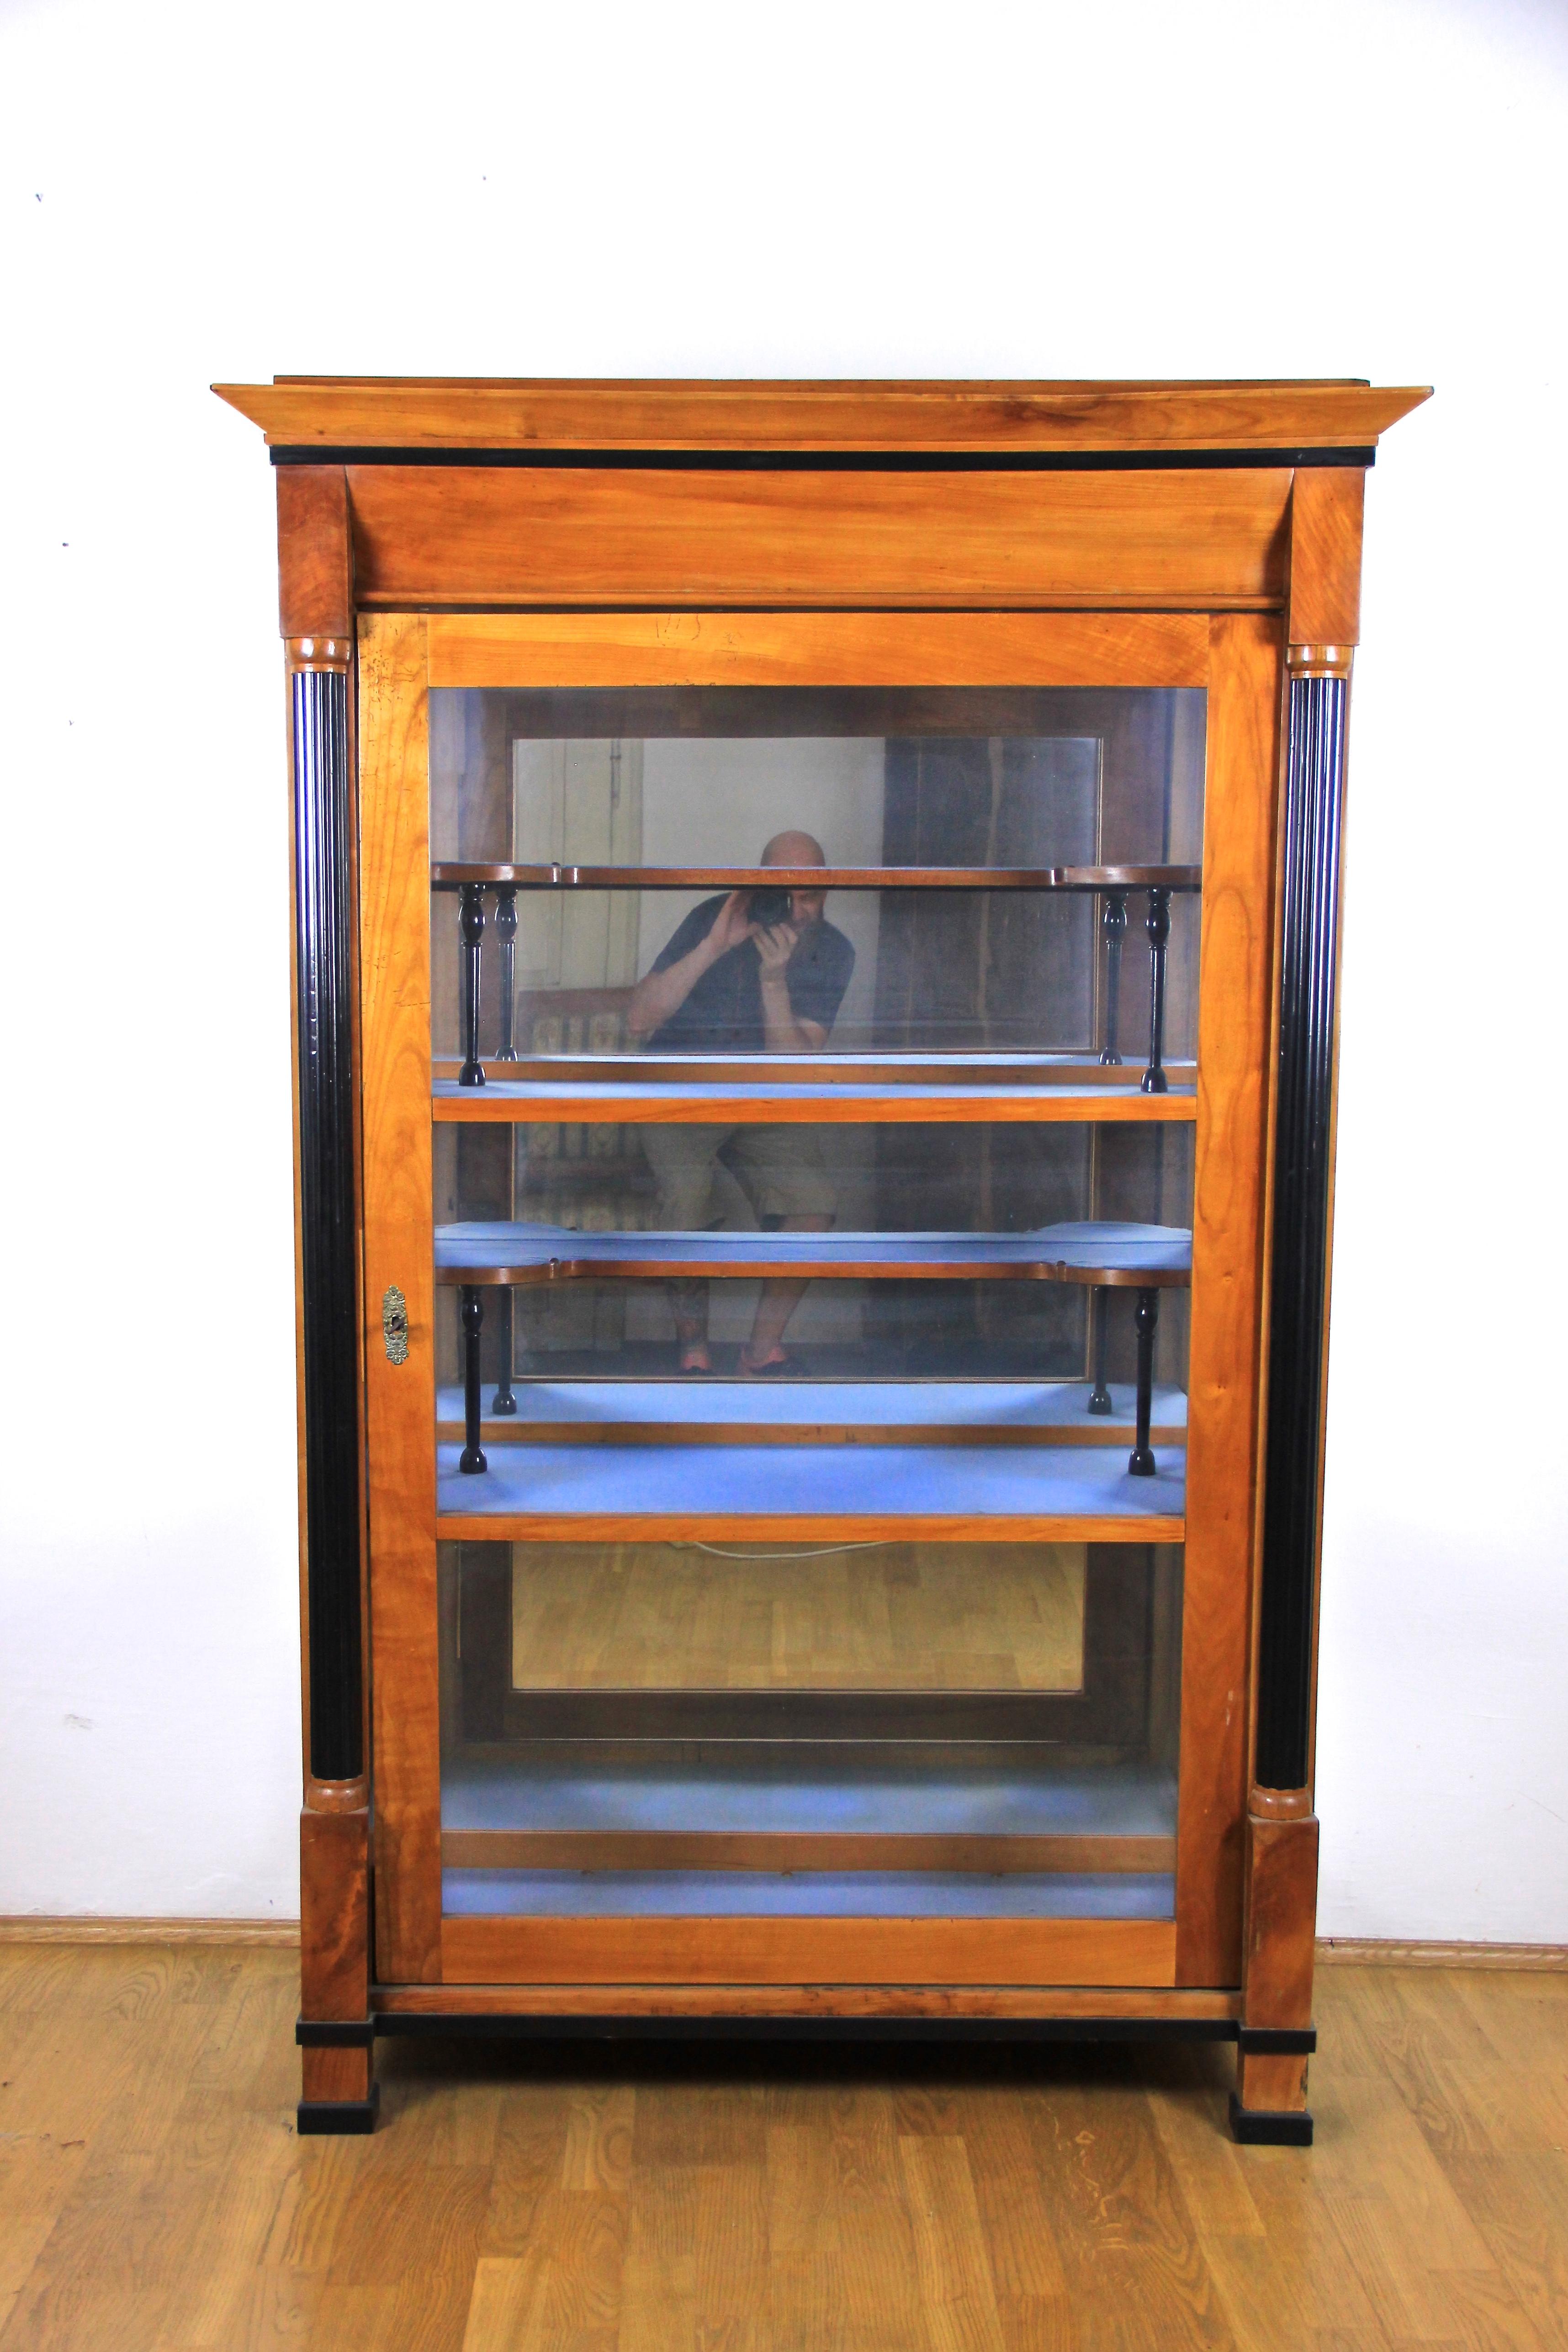 Amazing Biedermeier vitrine or display case from the very late second Biedermeier era around the end of the 19th century. Glassed on three sides, this pleasant cherry wood veneered vitrine captivates with two carved ebonized half columns. Inside you